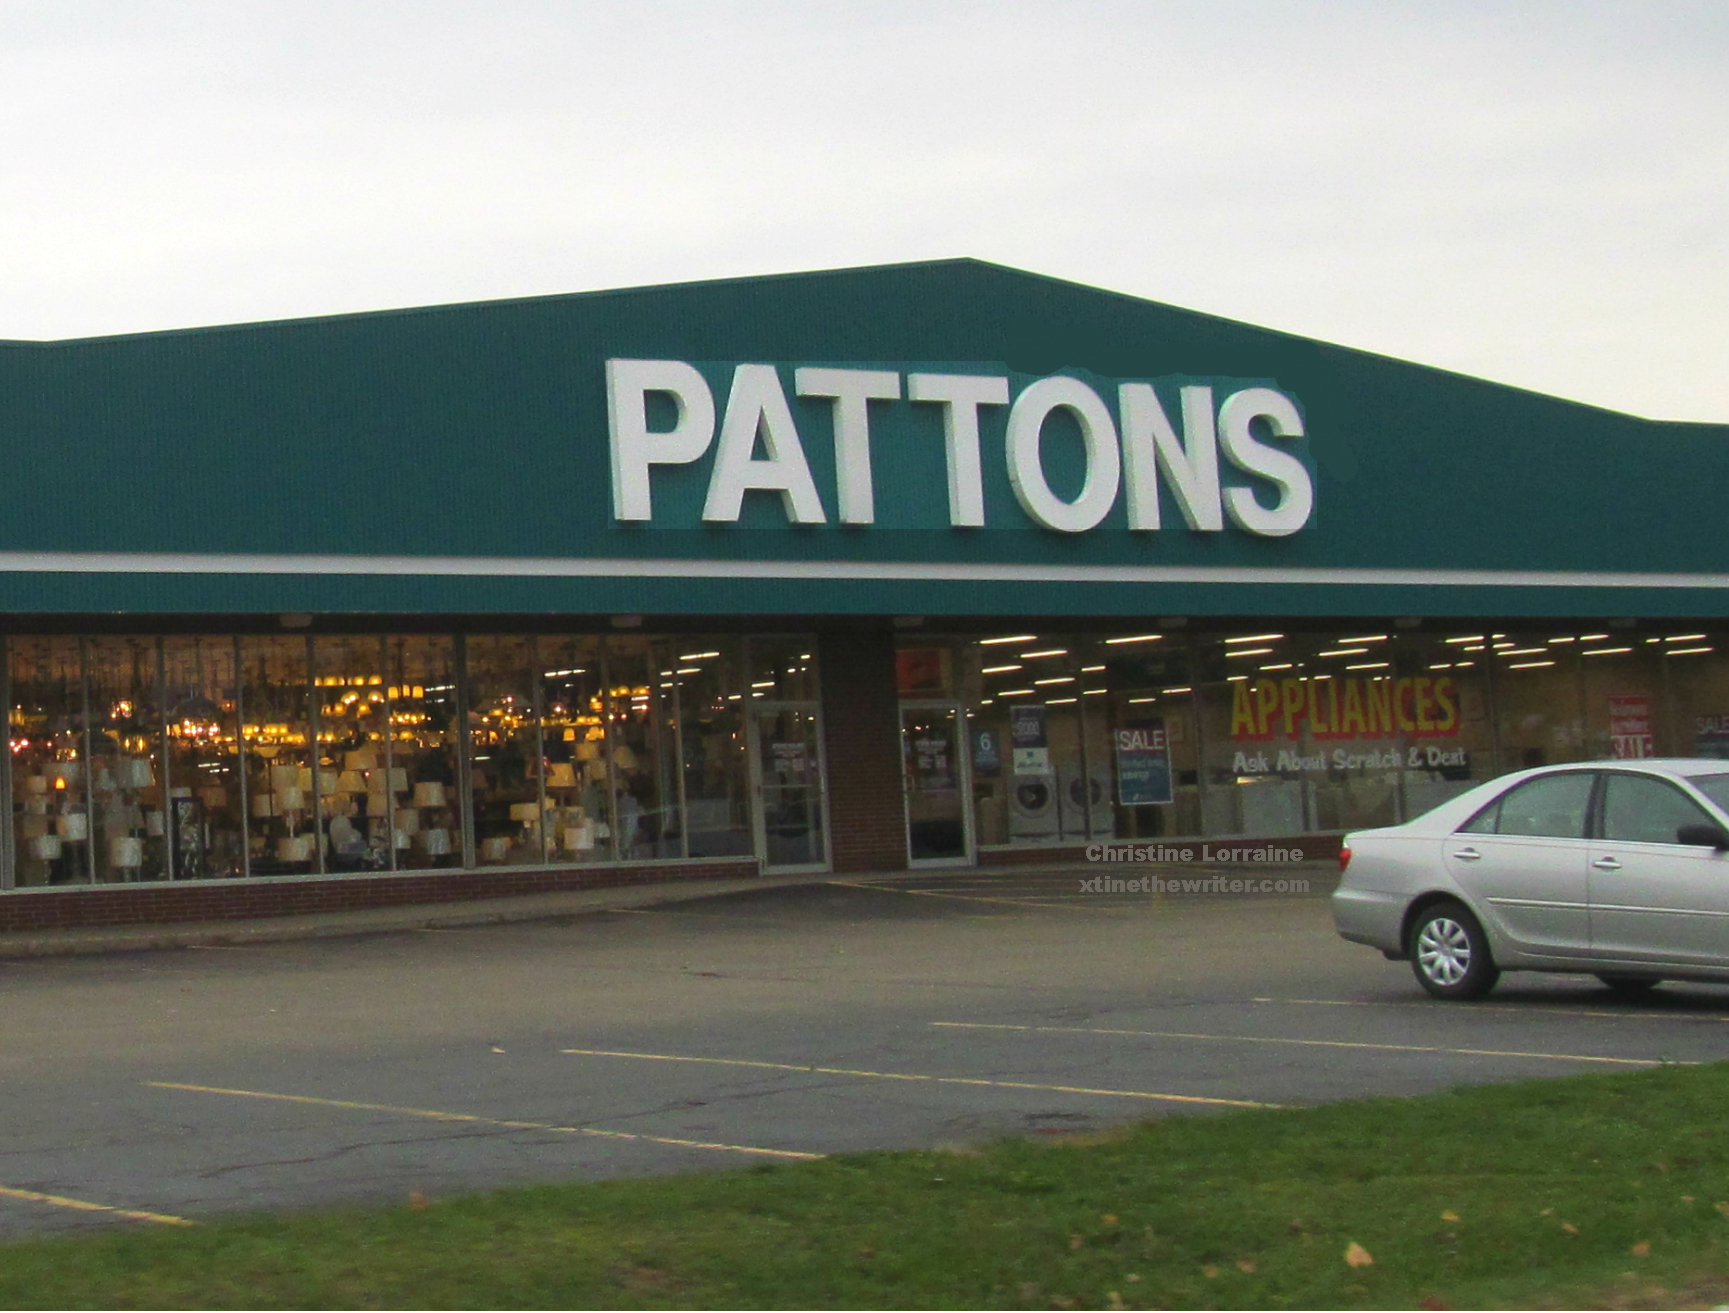 PATTONS QUALITY HOME FURNISHINGS